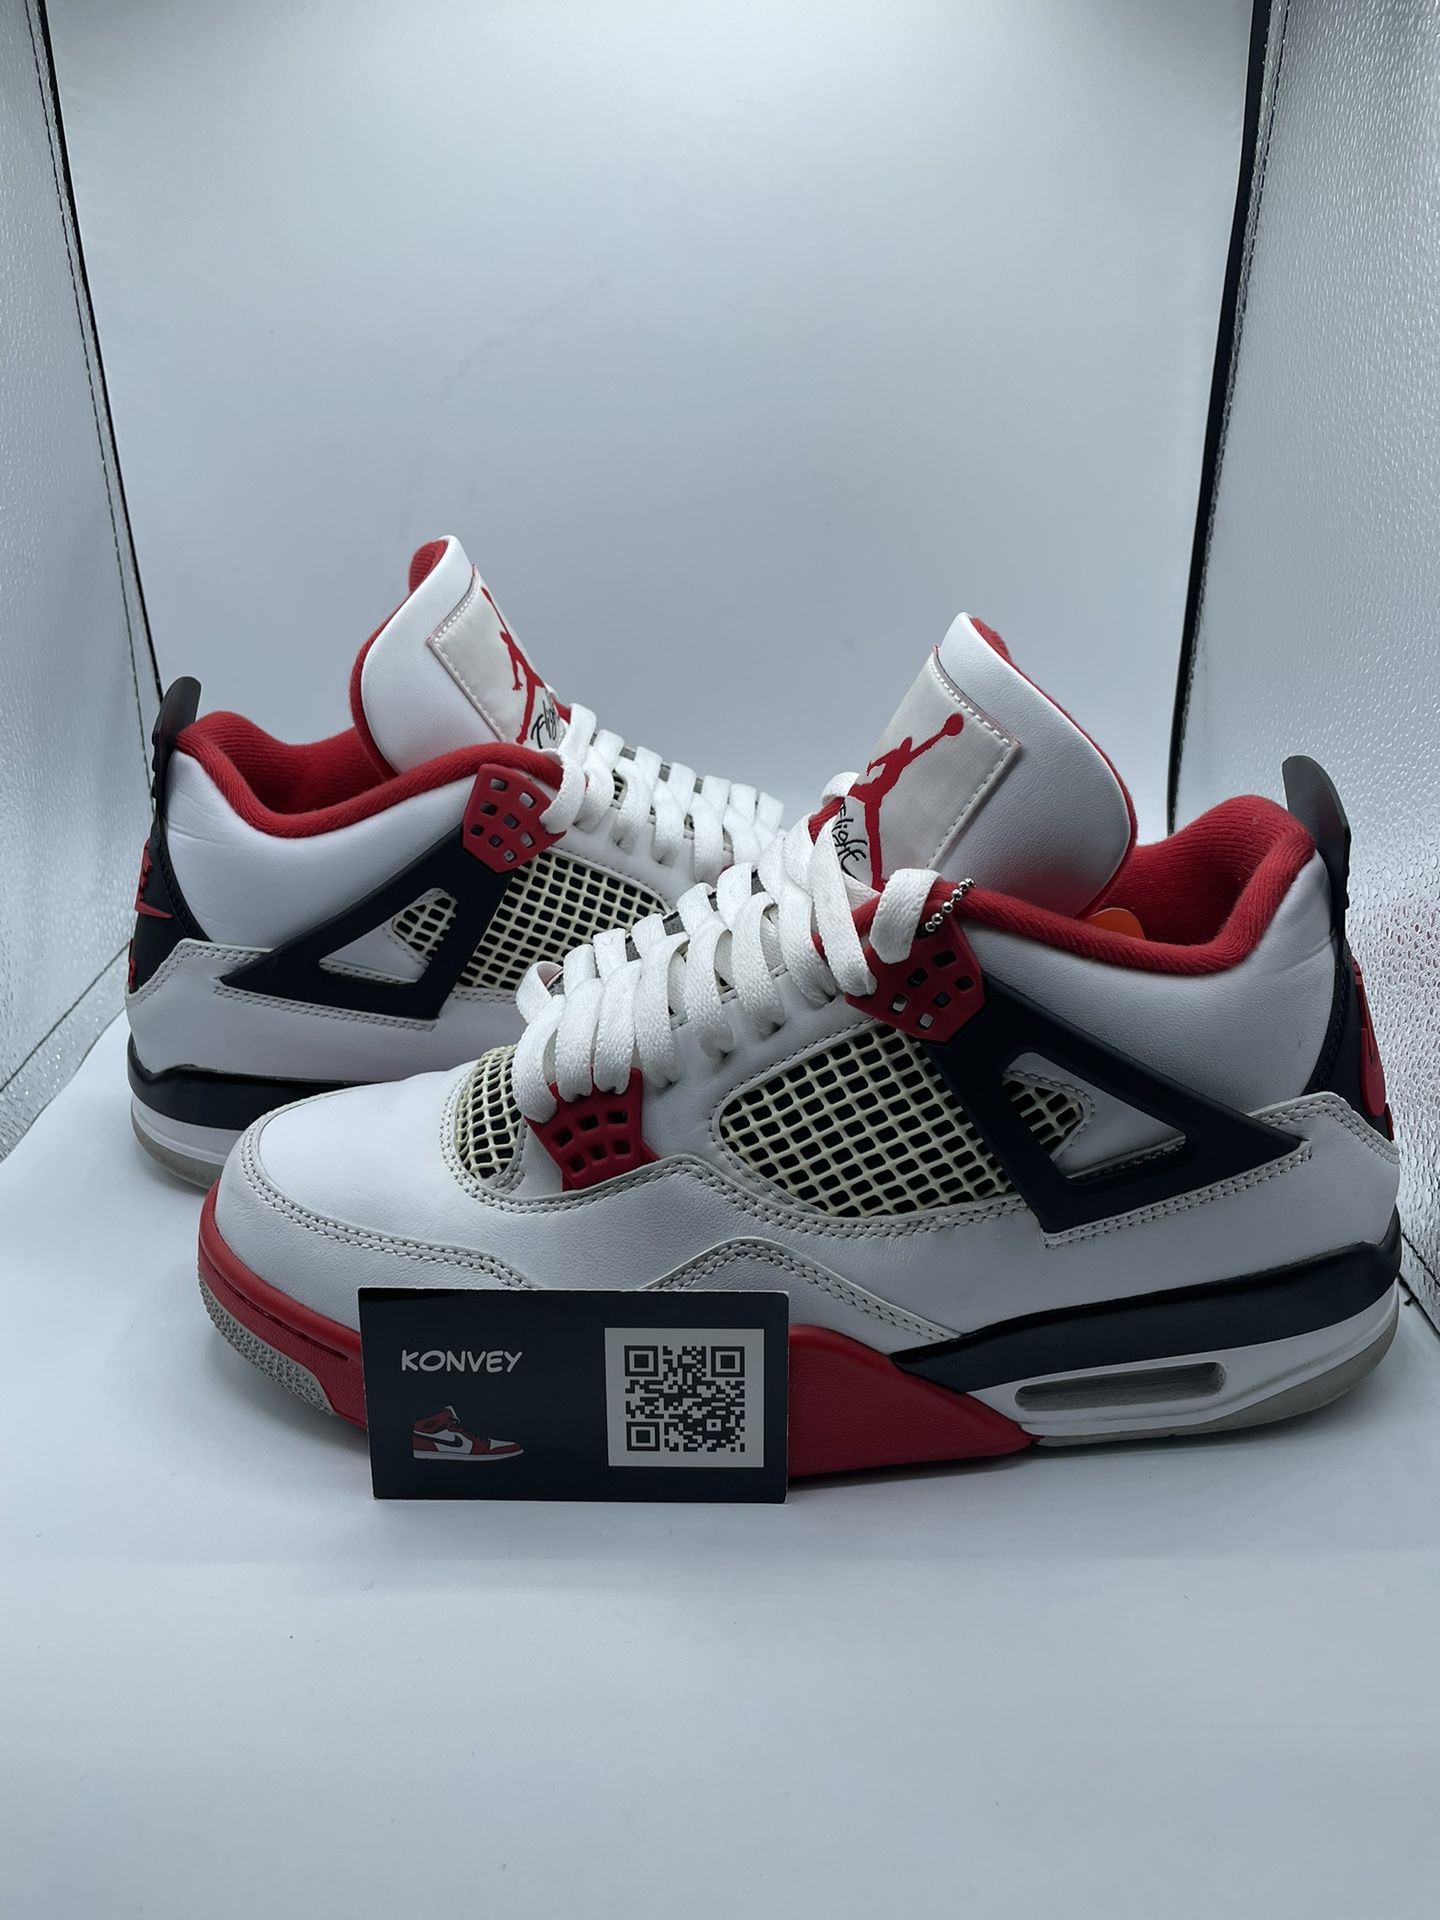 Used Air Jordan 4 Fire Red Size 9 